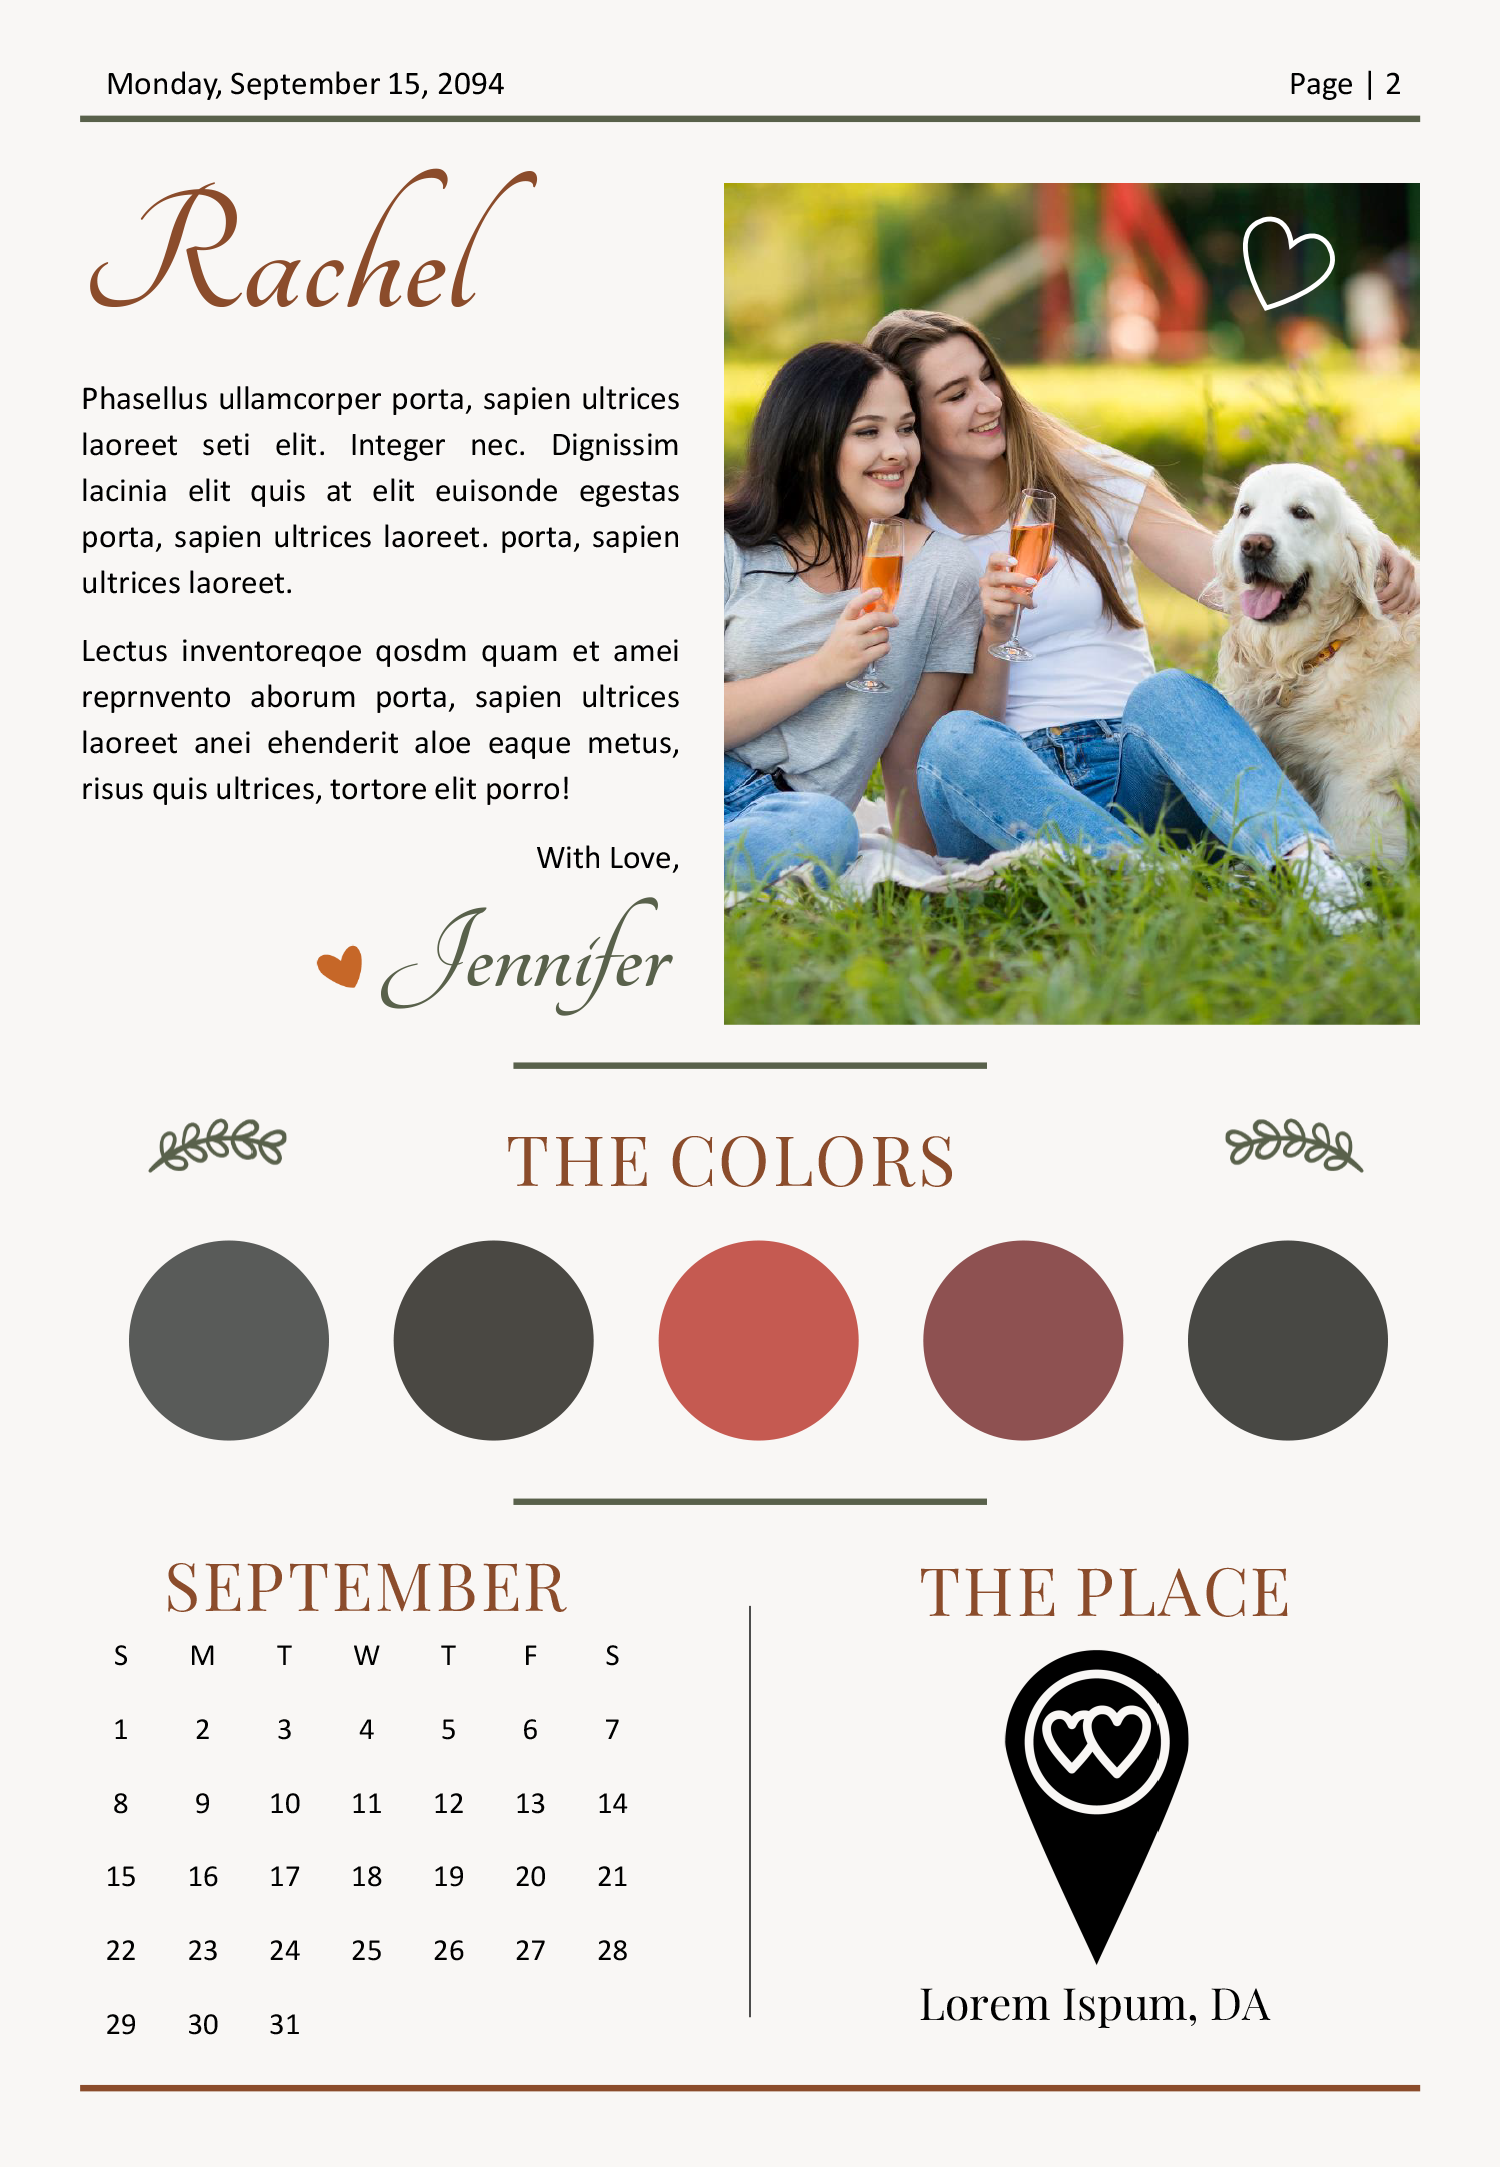 Maid of Honor Proposal Newspaper Template - Page 02